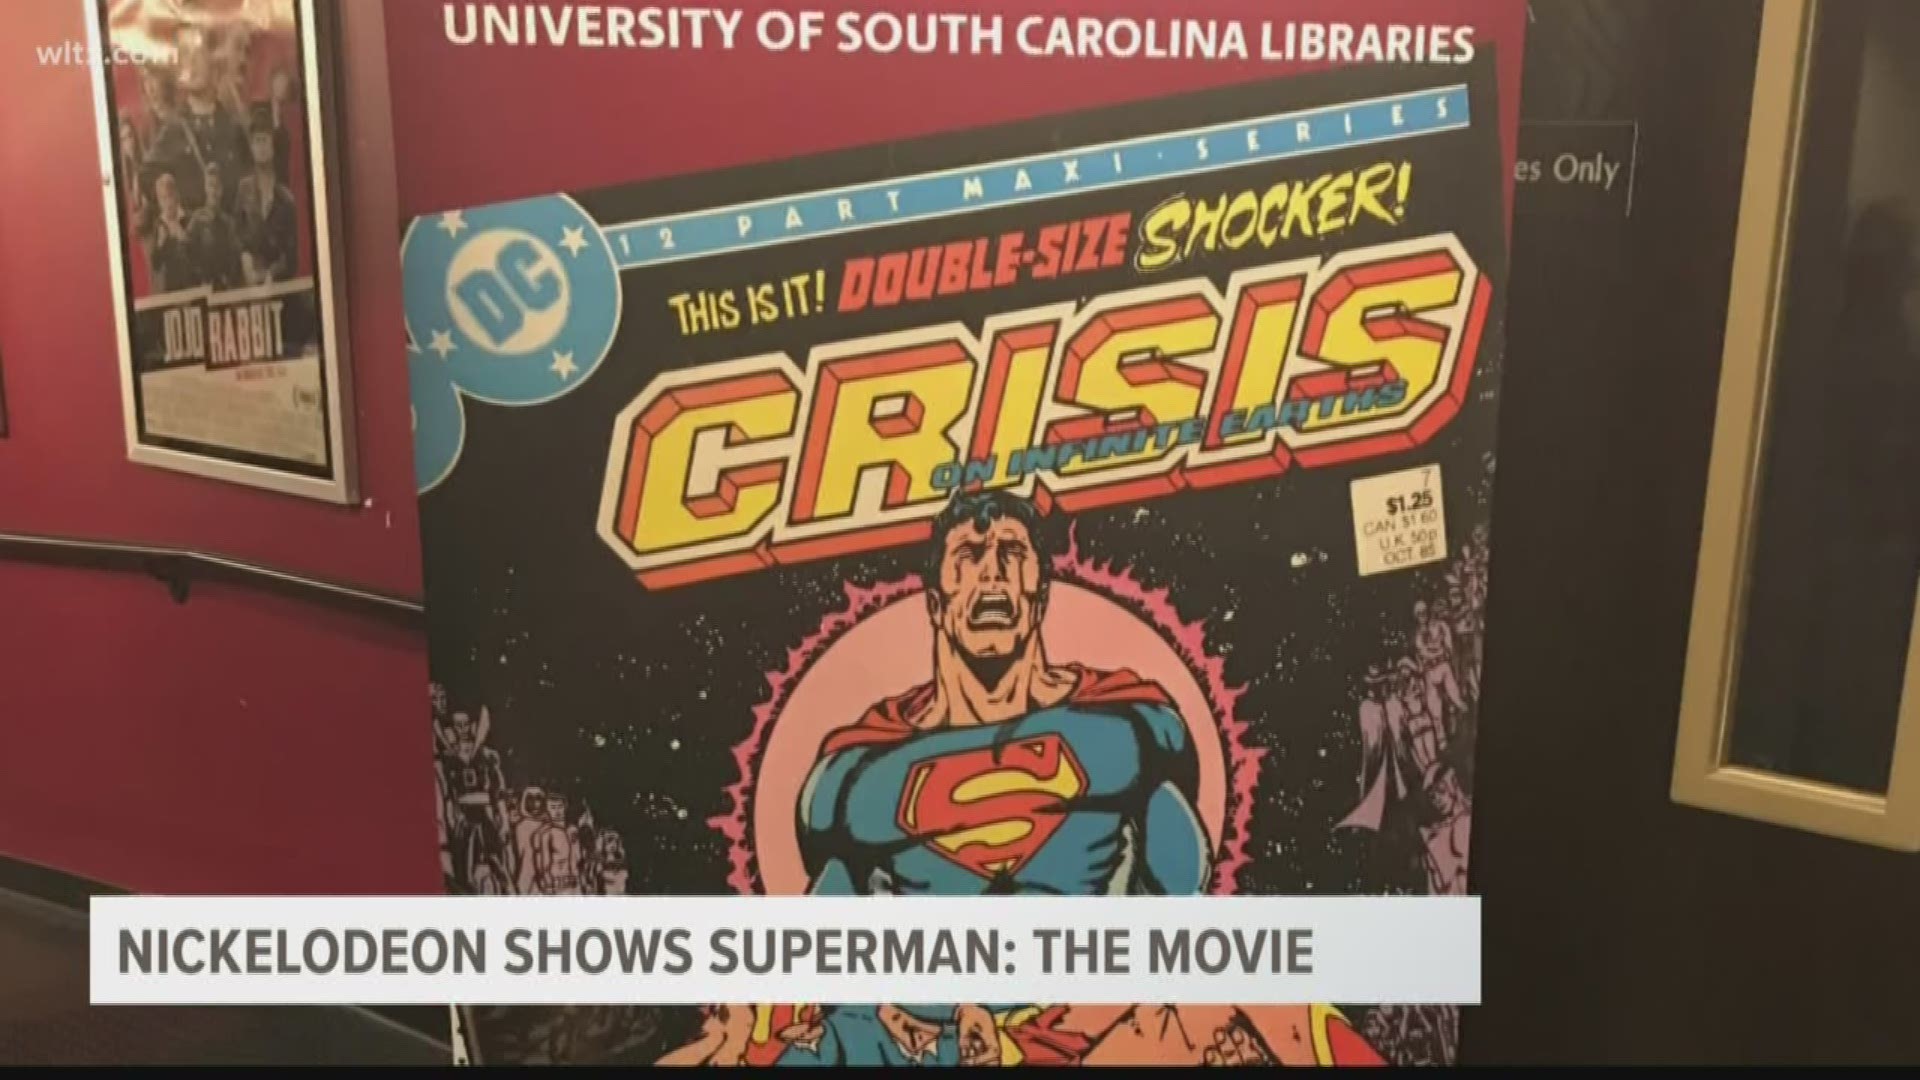 Partnering with the University of South Carolina, the Nickelodeon showed the 1978 blockbuster, Superman: The Movie, featuring Christopher Reeve and Marlon Brando.